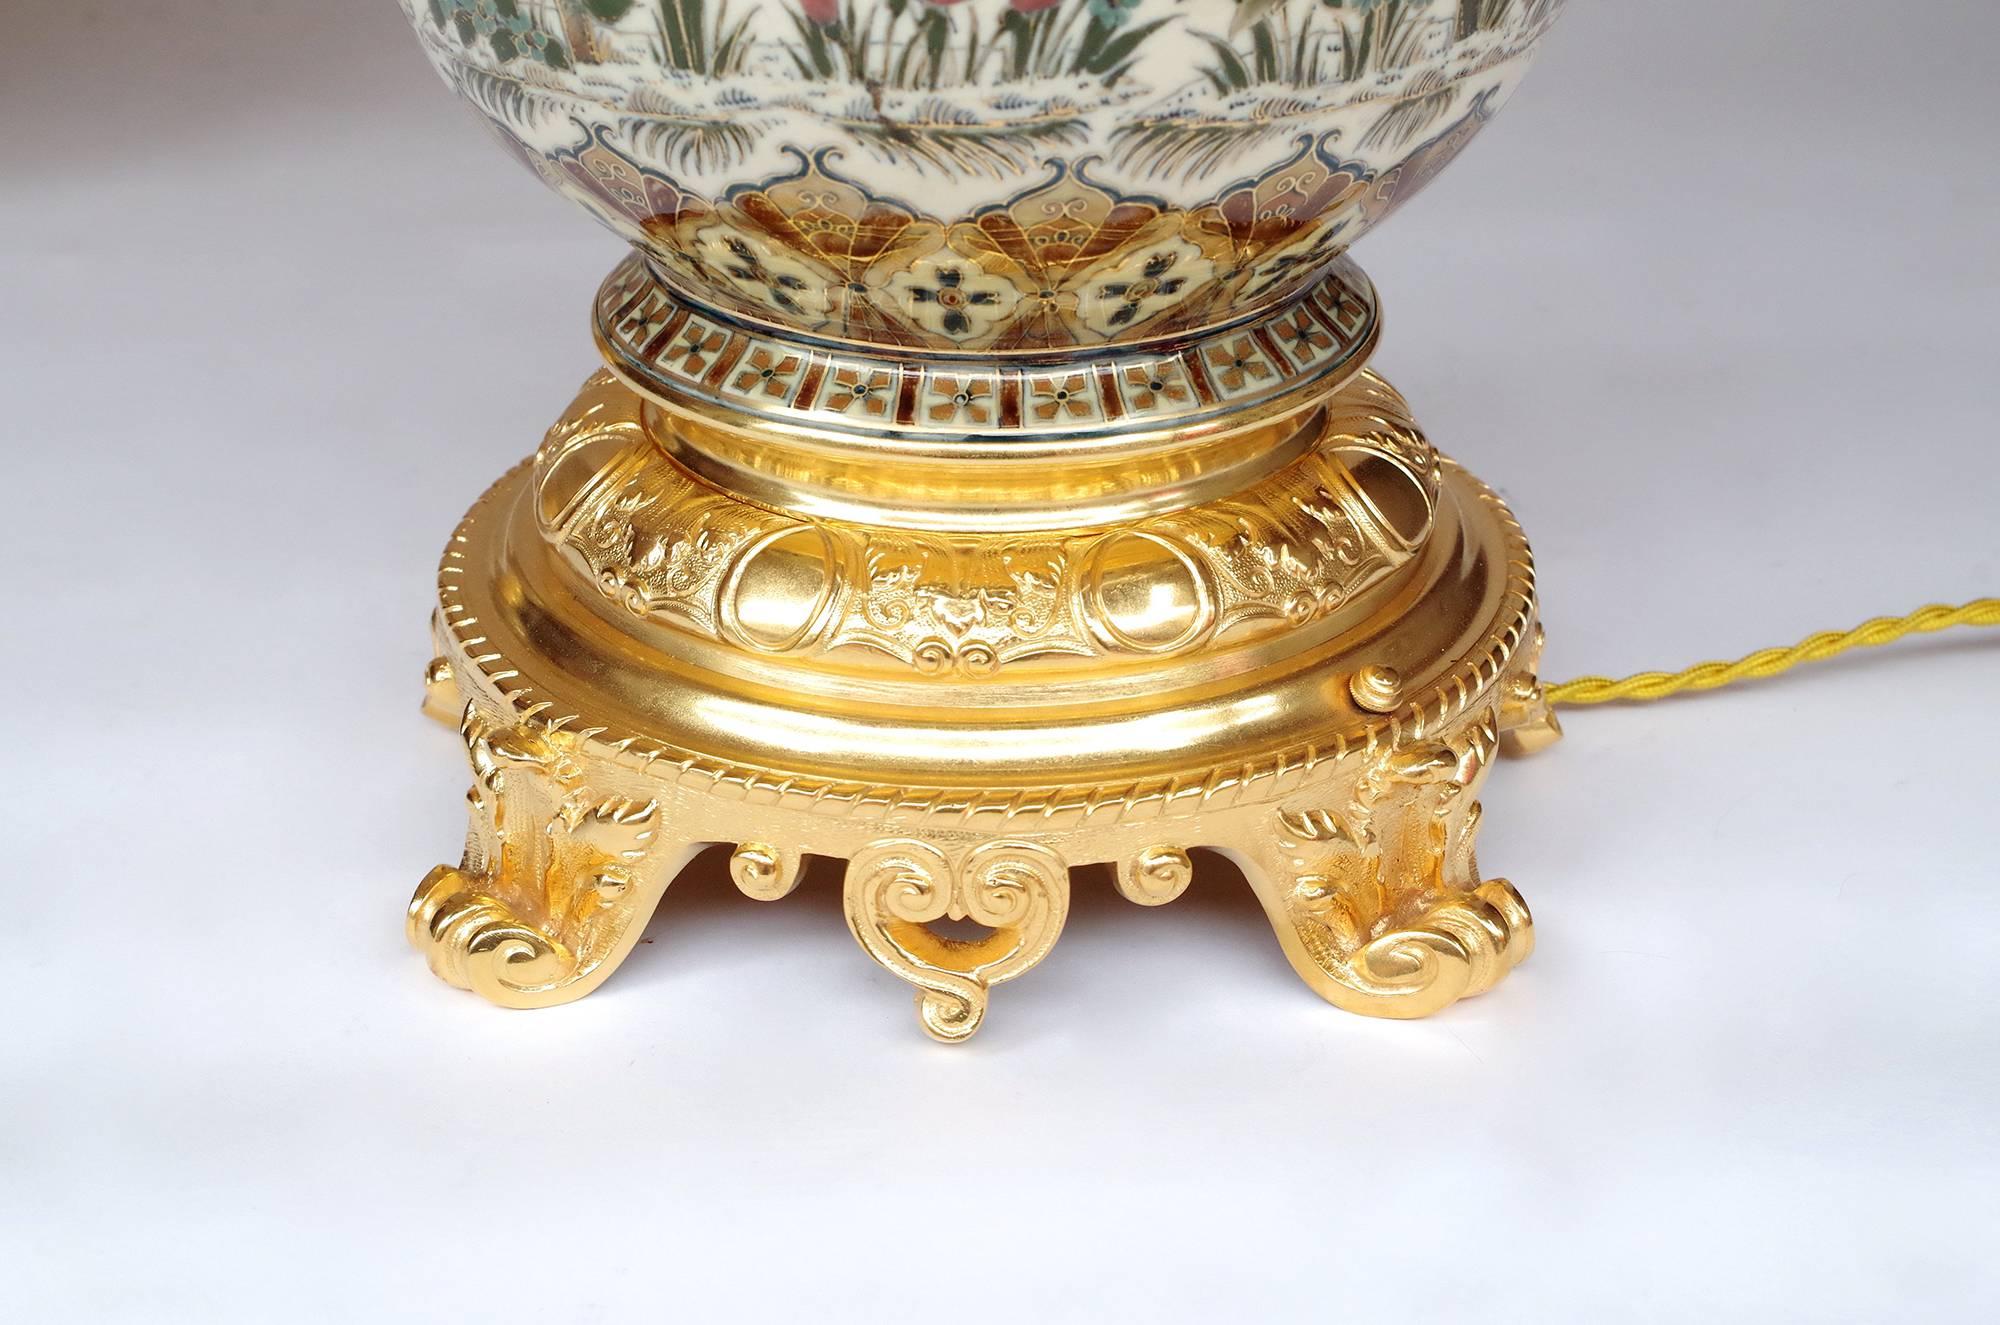 Pair of baluster shaped lamps in Zsolnay porcelain mounted in gilt bronzes.
Cream background decorated with birds, vegetals and flowers patterns, adorned with two friezes of stylized palm-leaves on the upper and lower parts of the body lamp with